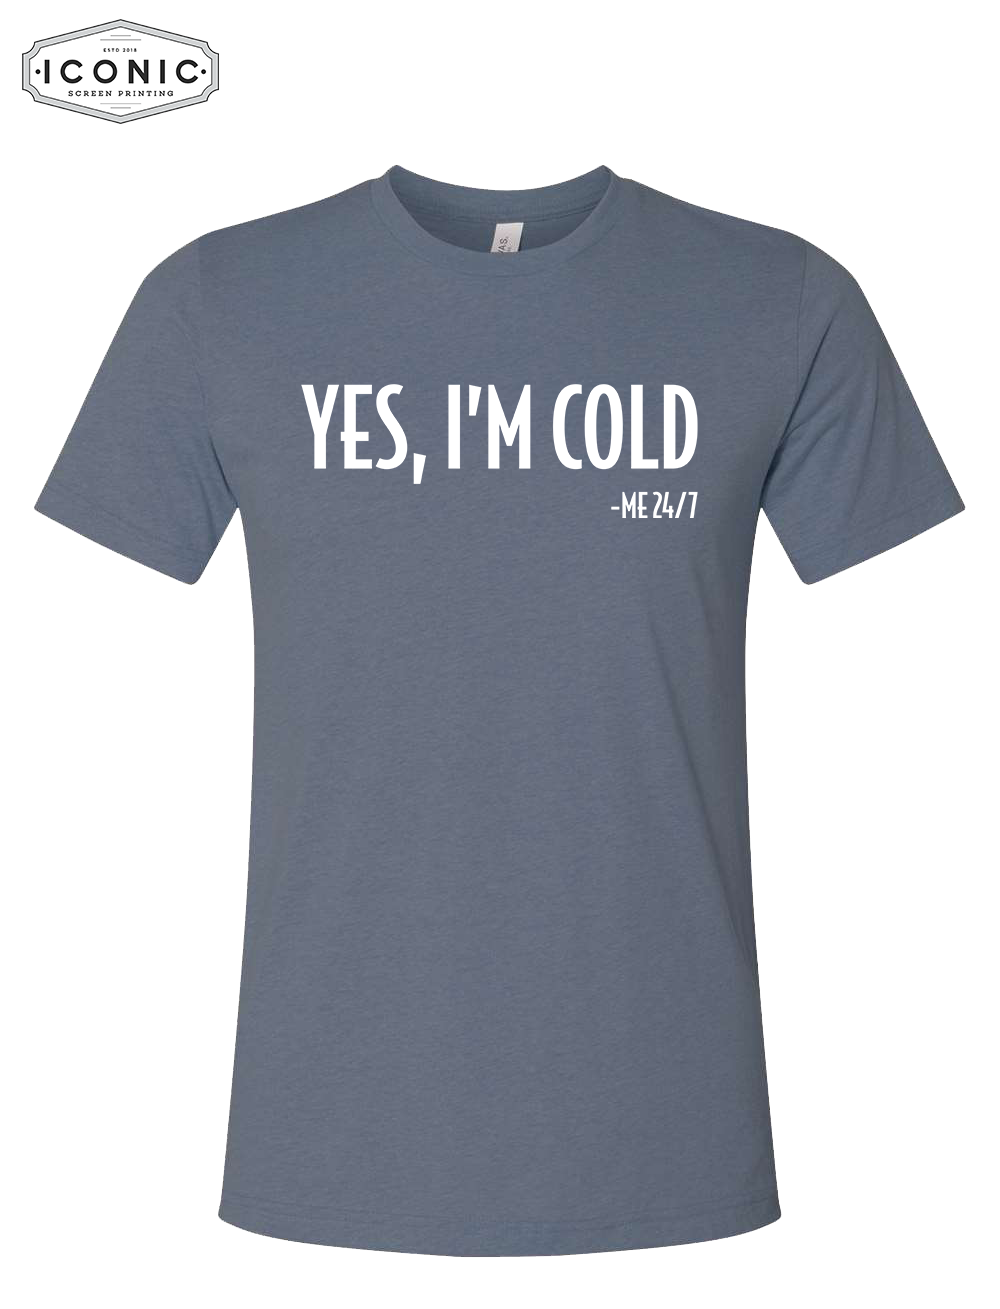 Yes, I'm Cold - Unisex Jersey Tee